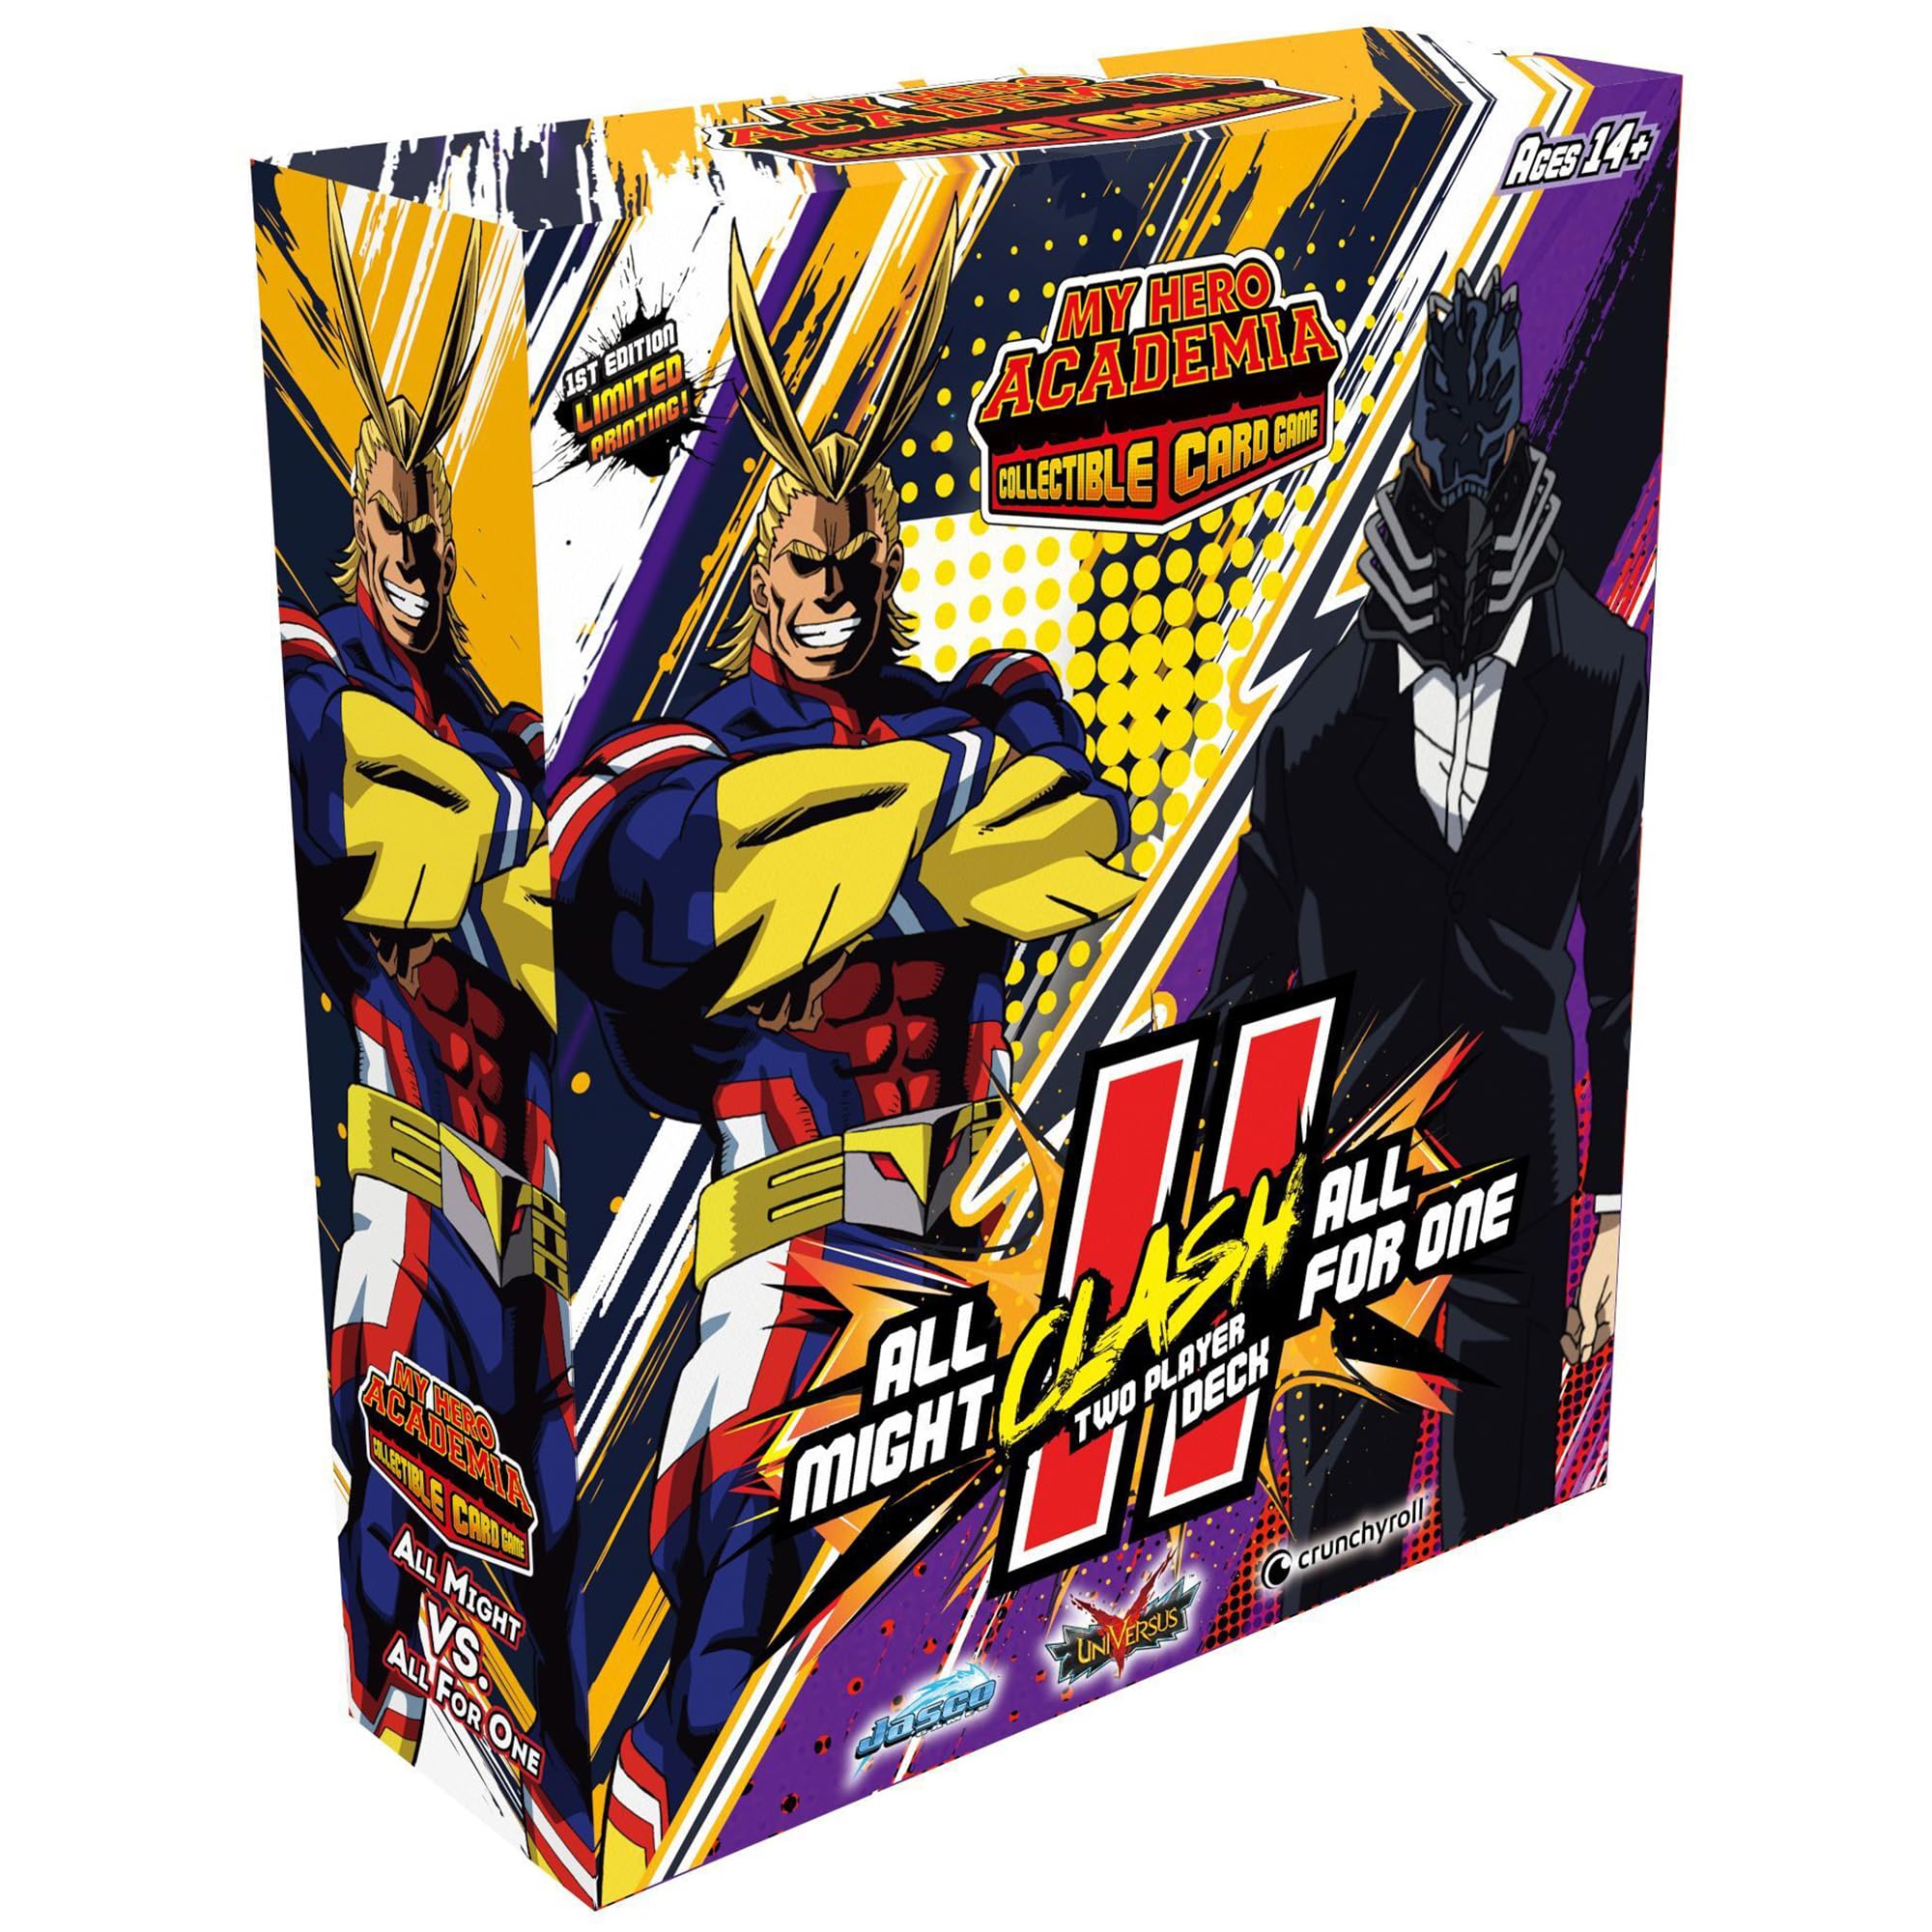 My Hero Academia Collectible Card Game All Might Vs. All Clash Decks $15 + Free Shipping w/ Prime or on Orders $35+